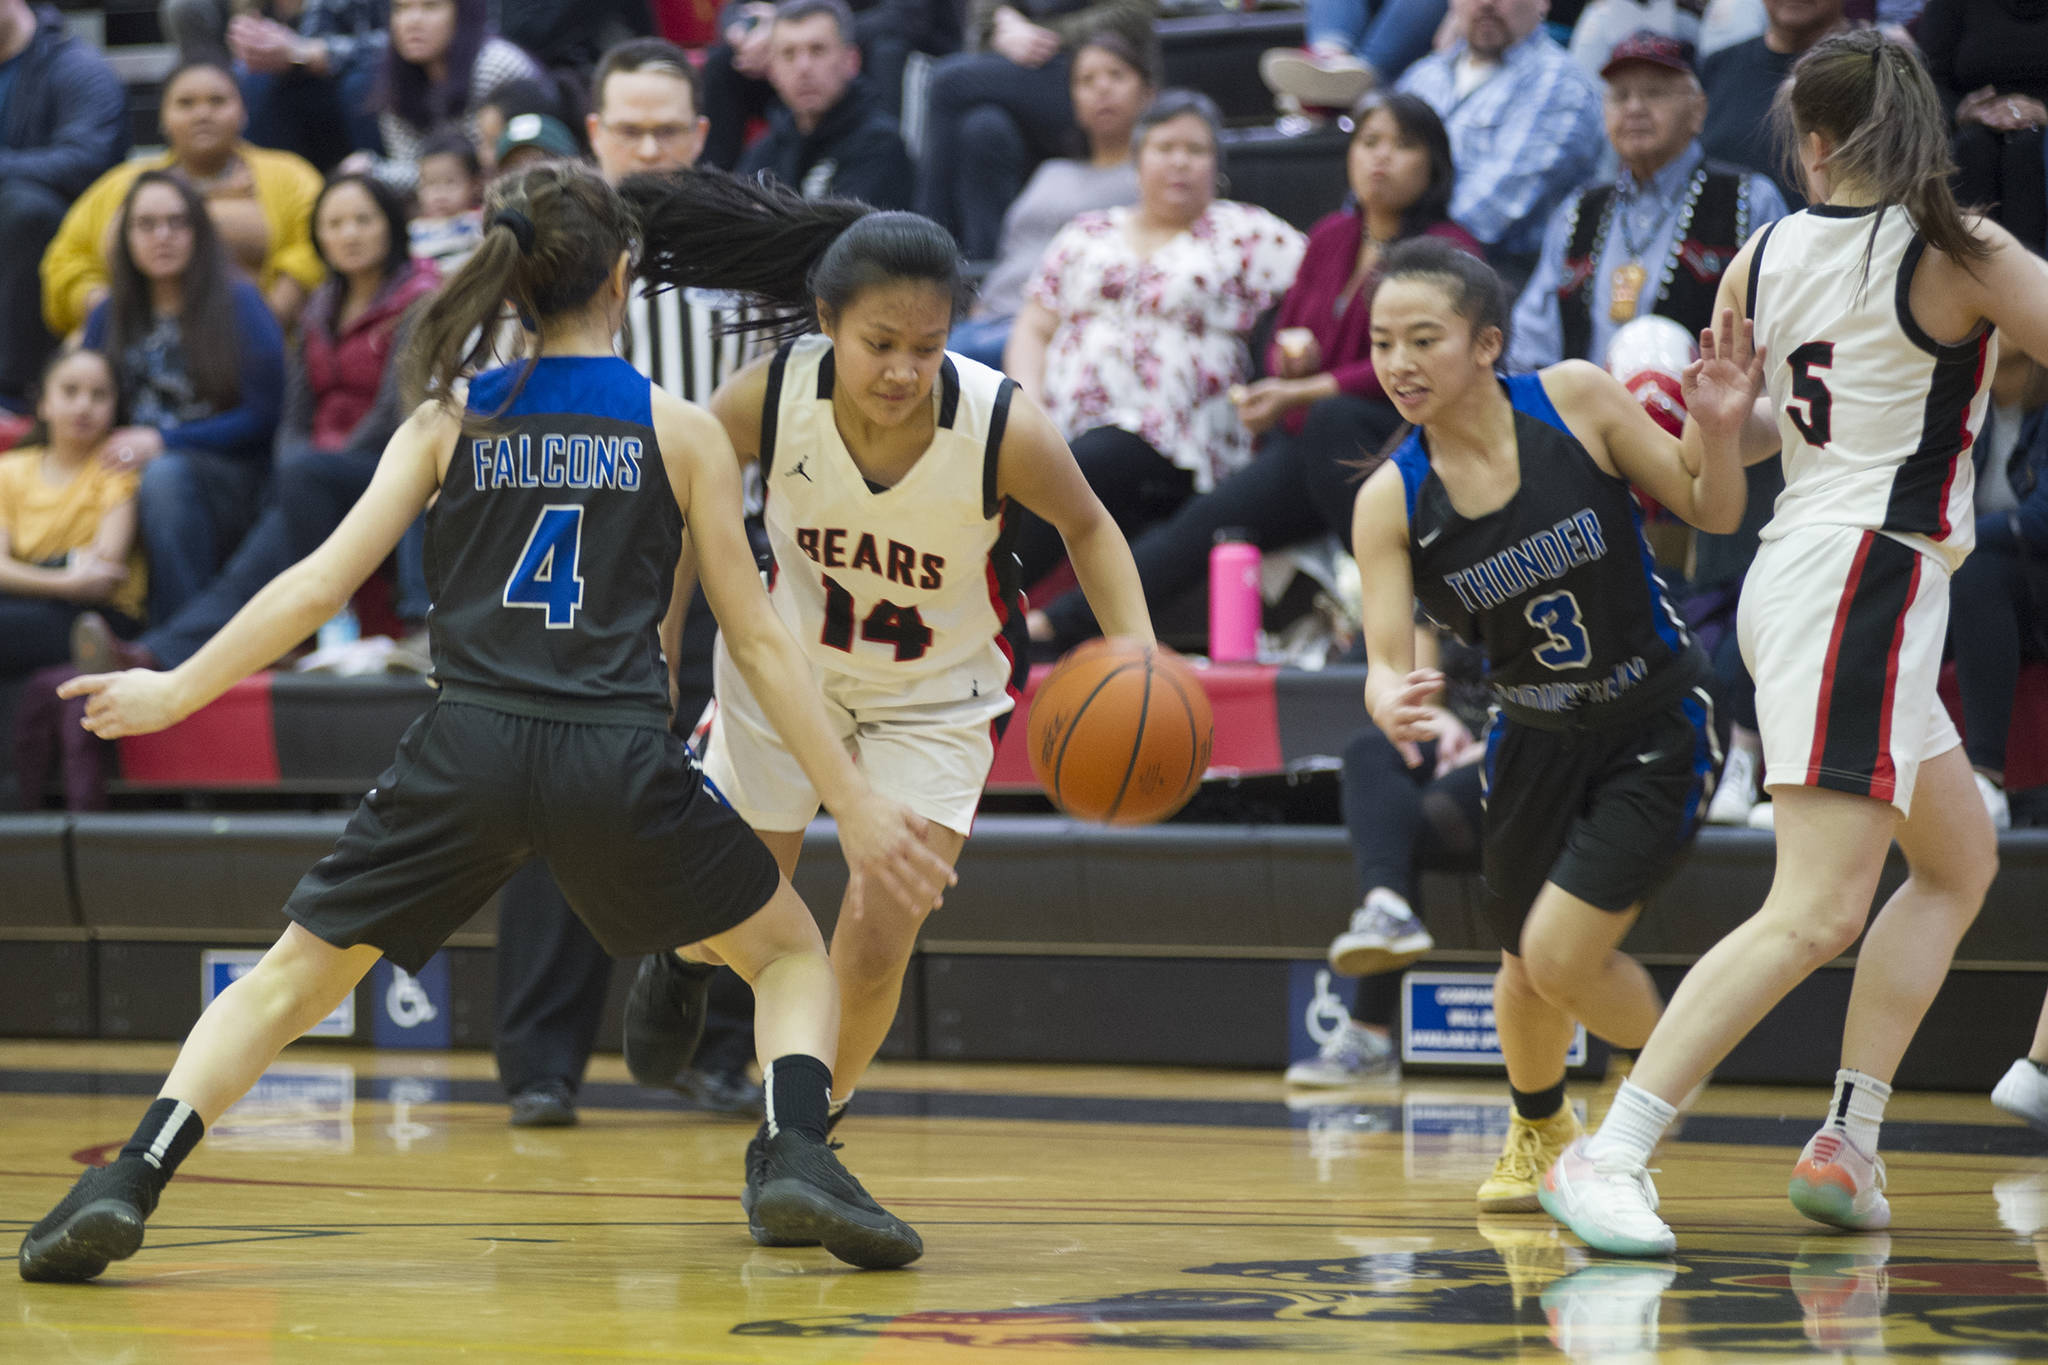 Juneau-Douglas’ Alyxn Bohulano dribbles in between Thunder Mountain’s Johanna Pasion, left, and Neal Garcia in the first half at JDHS Saturday, March 2, 2019. (Nolin Ainsworth | Juneau Empire)